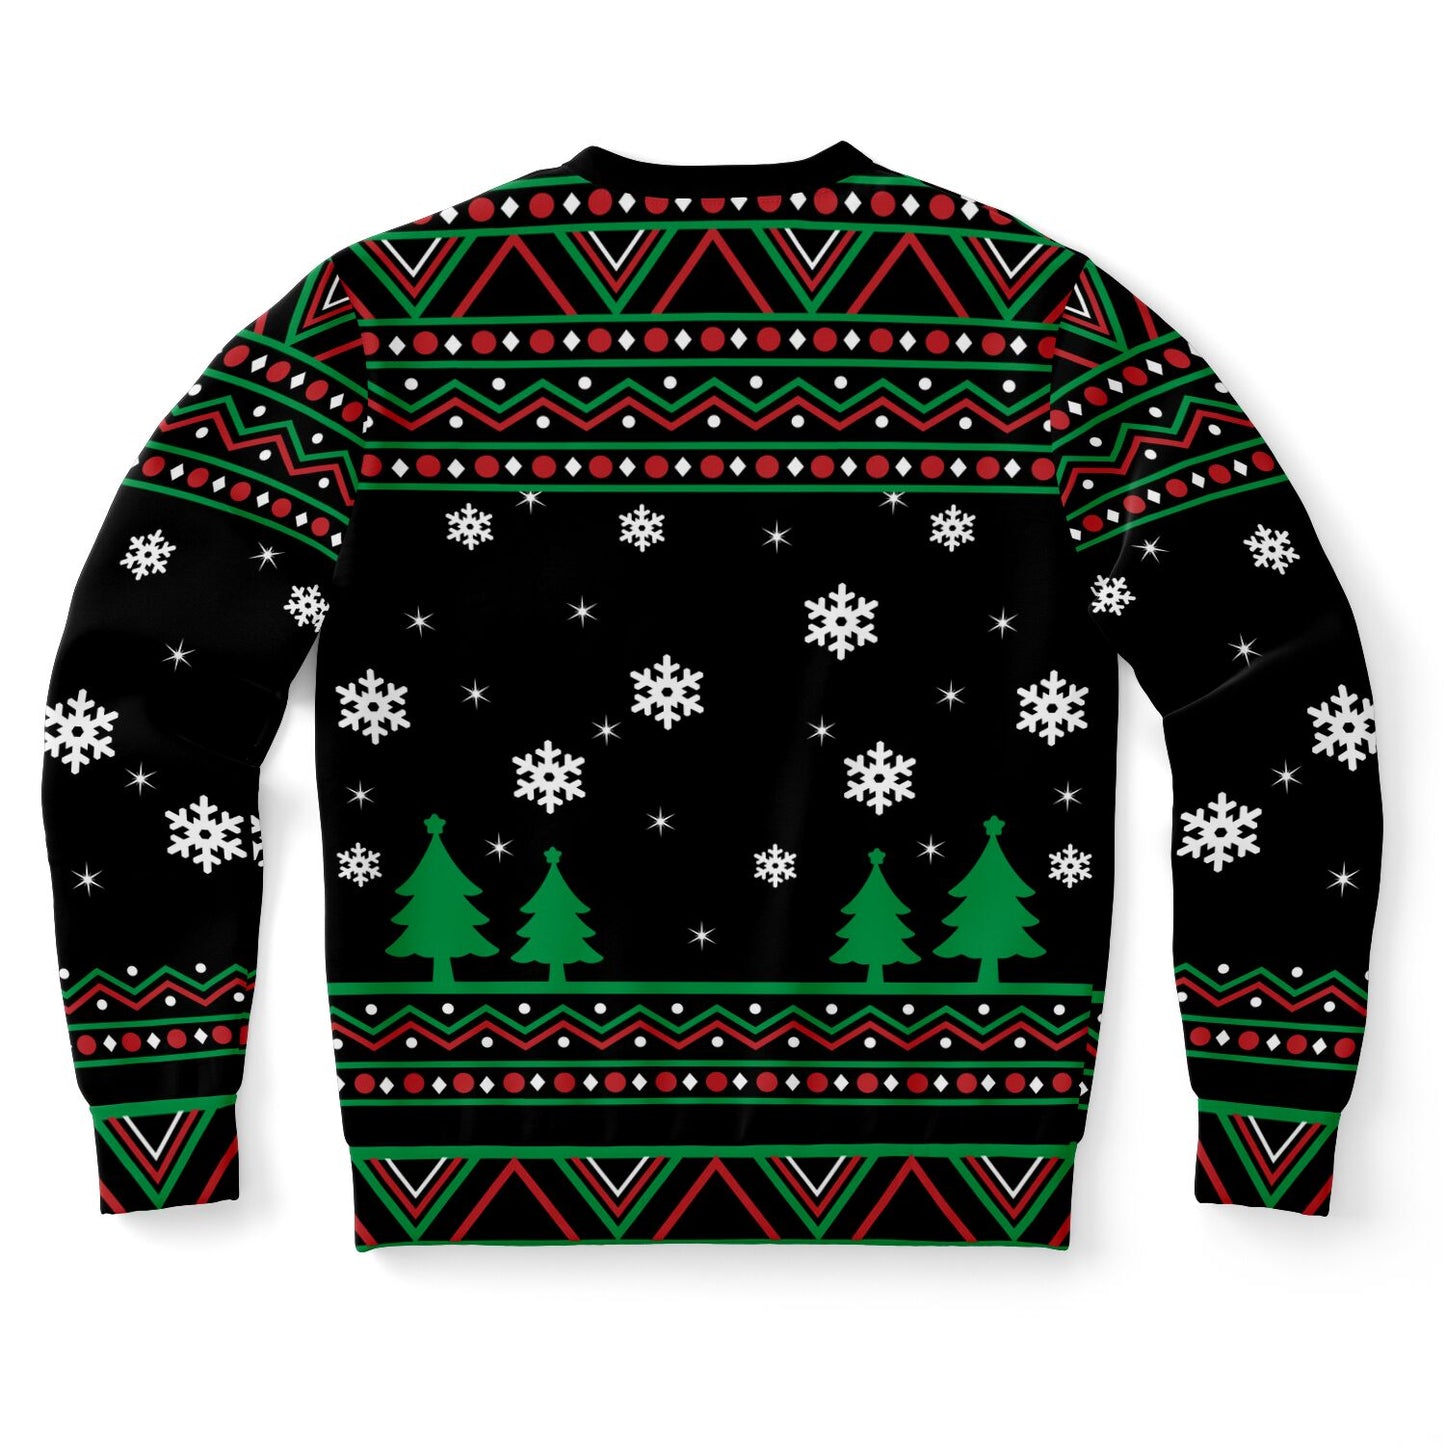 Brewdolph Ugly Sweater - Sport Finesse